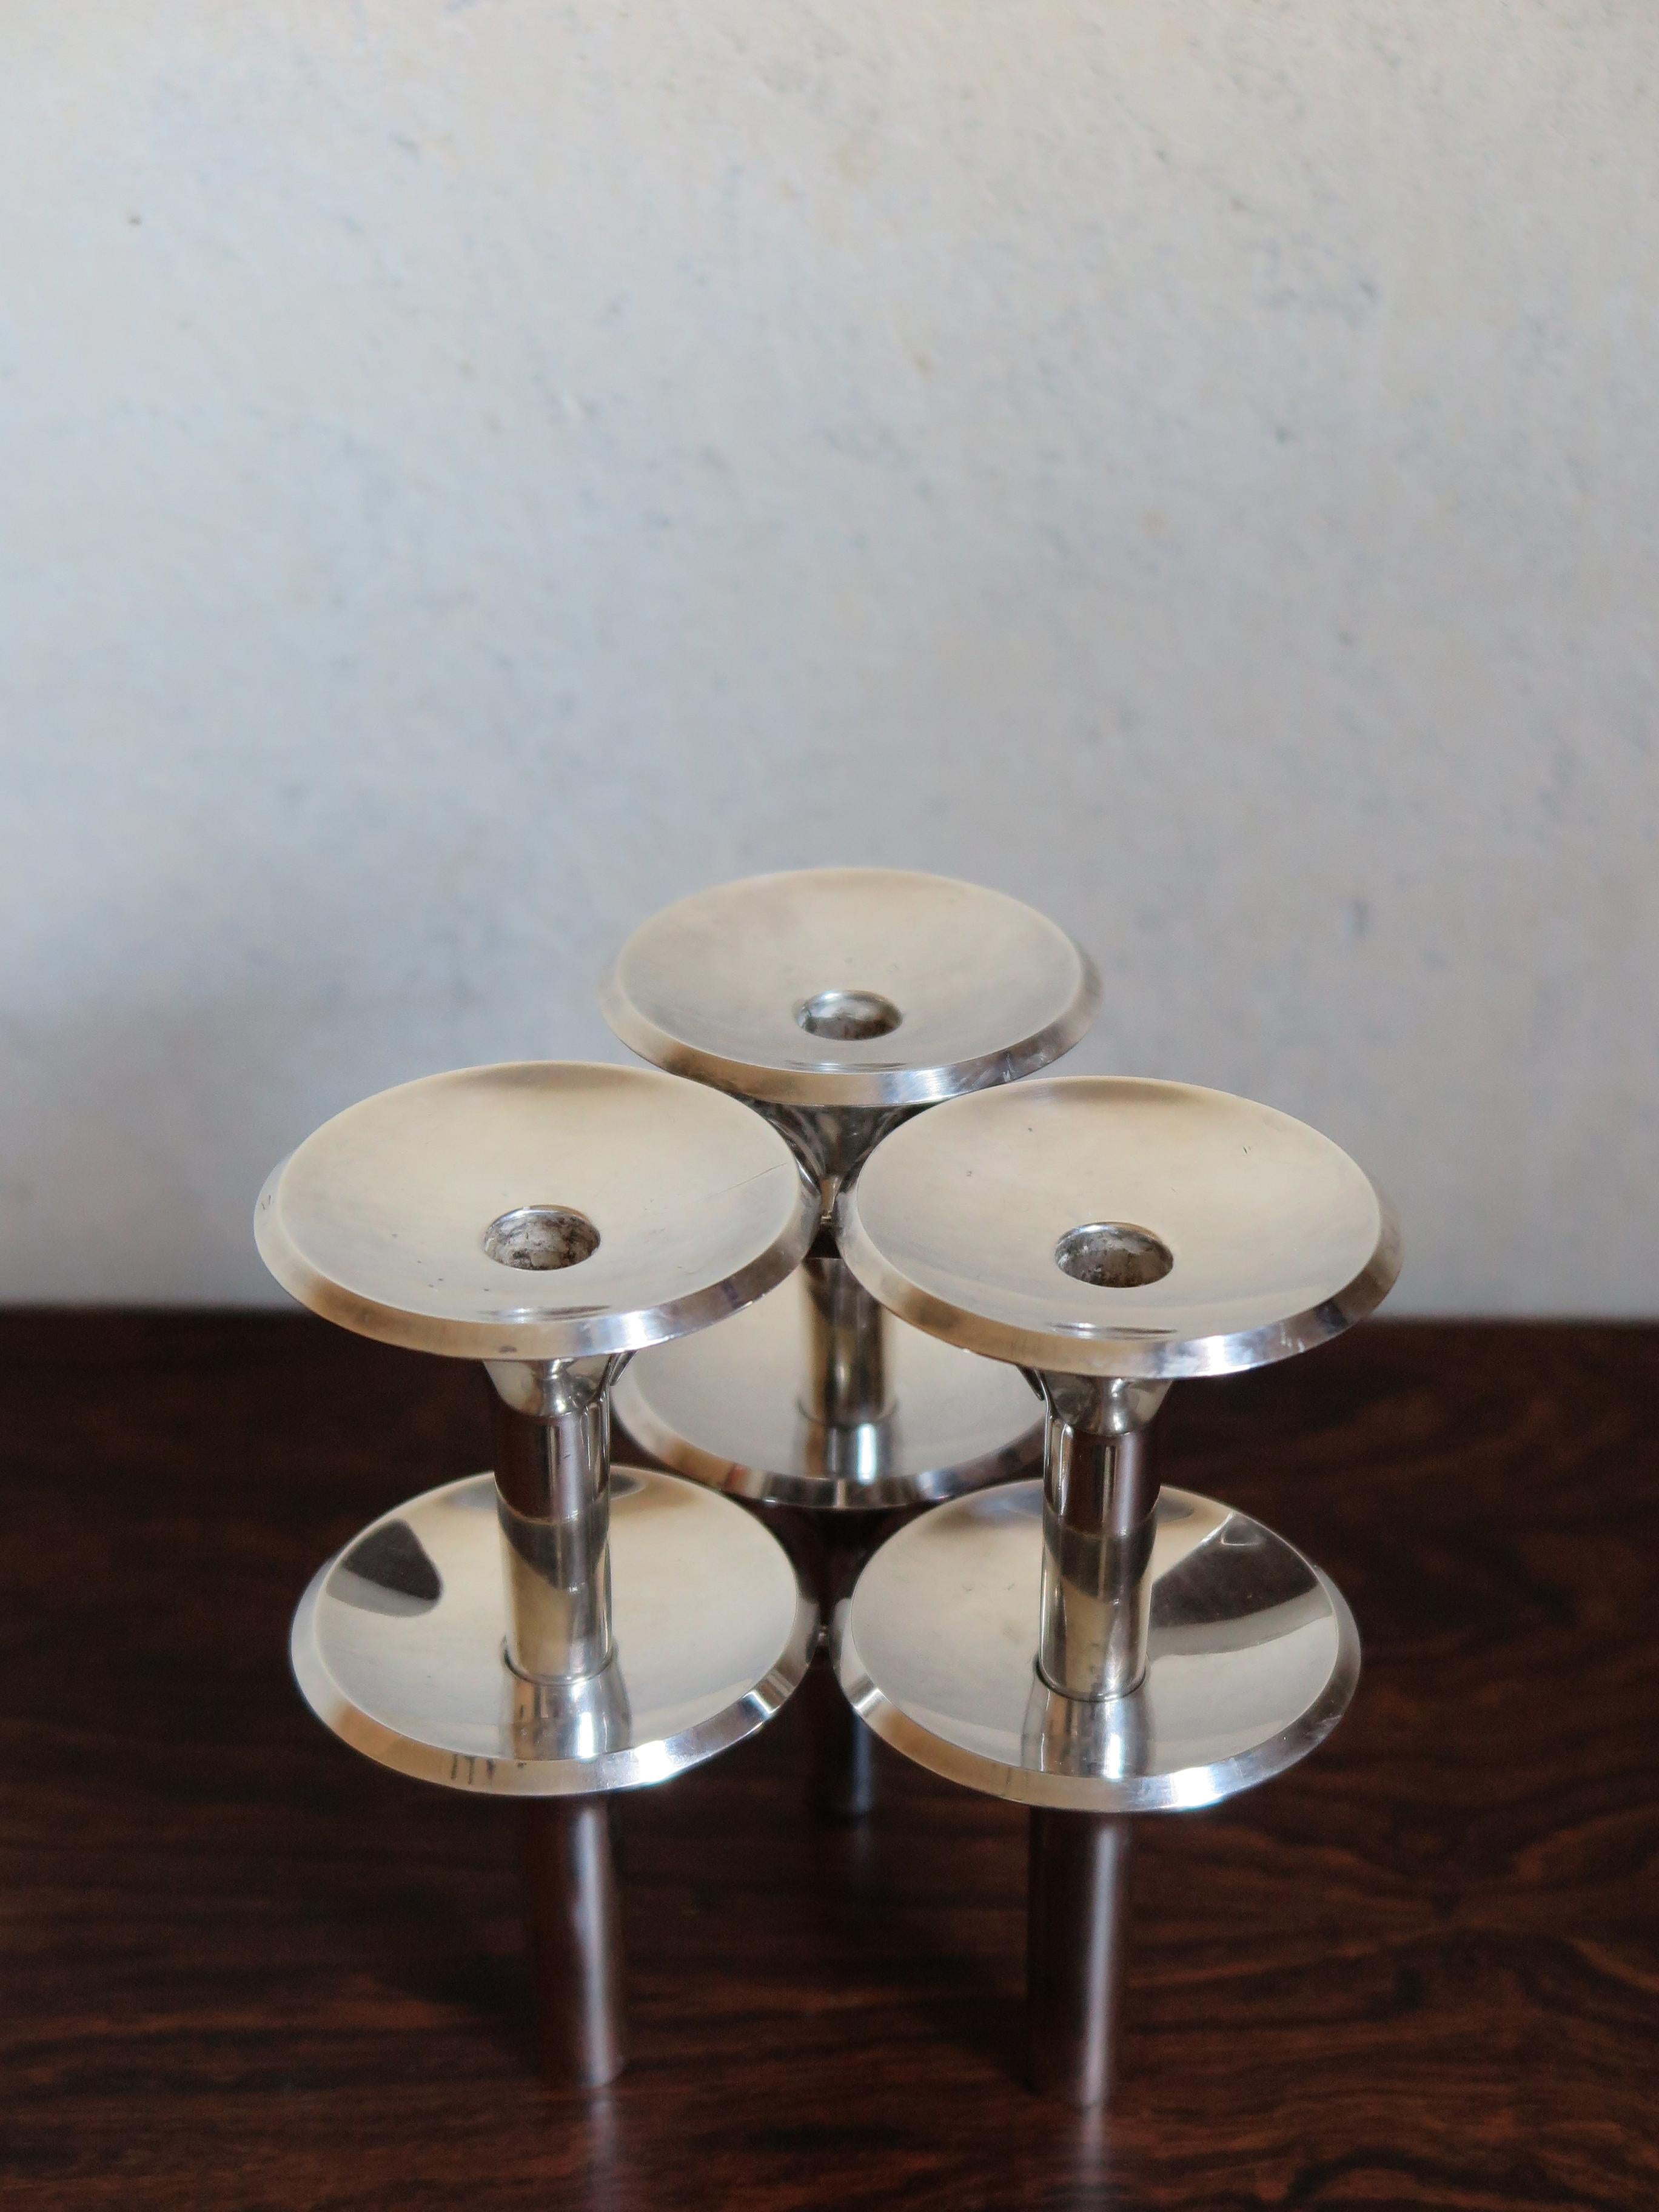 Ceasar Stoffi and Fritz Nagel Silver Plated Candleholders, 1960s For Sale 5